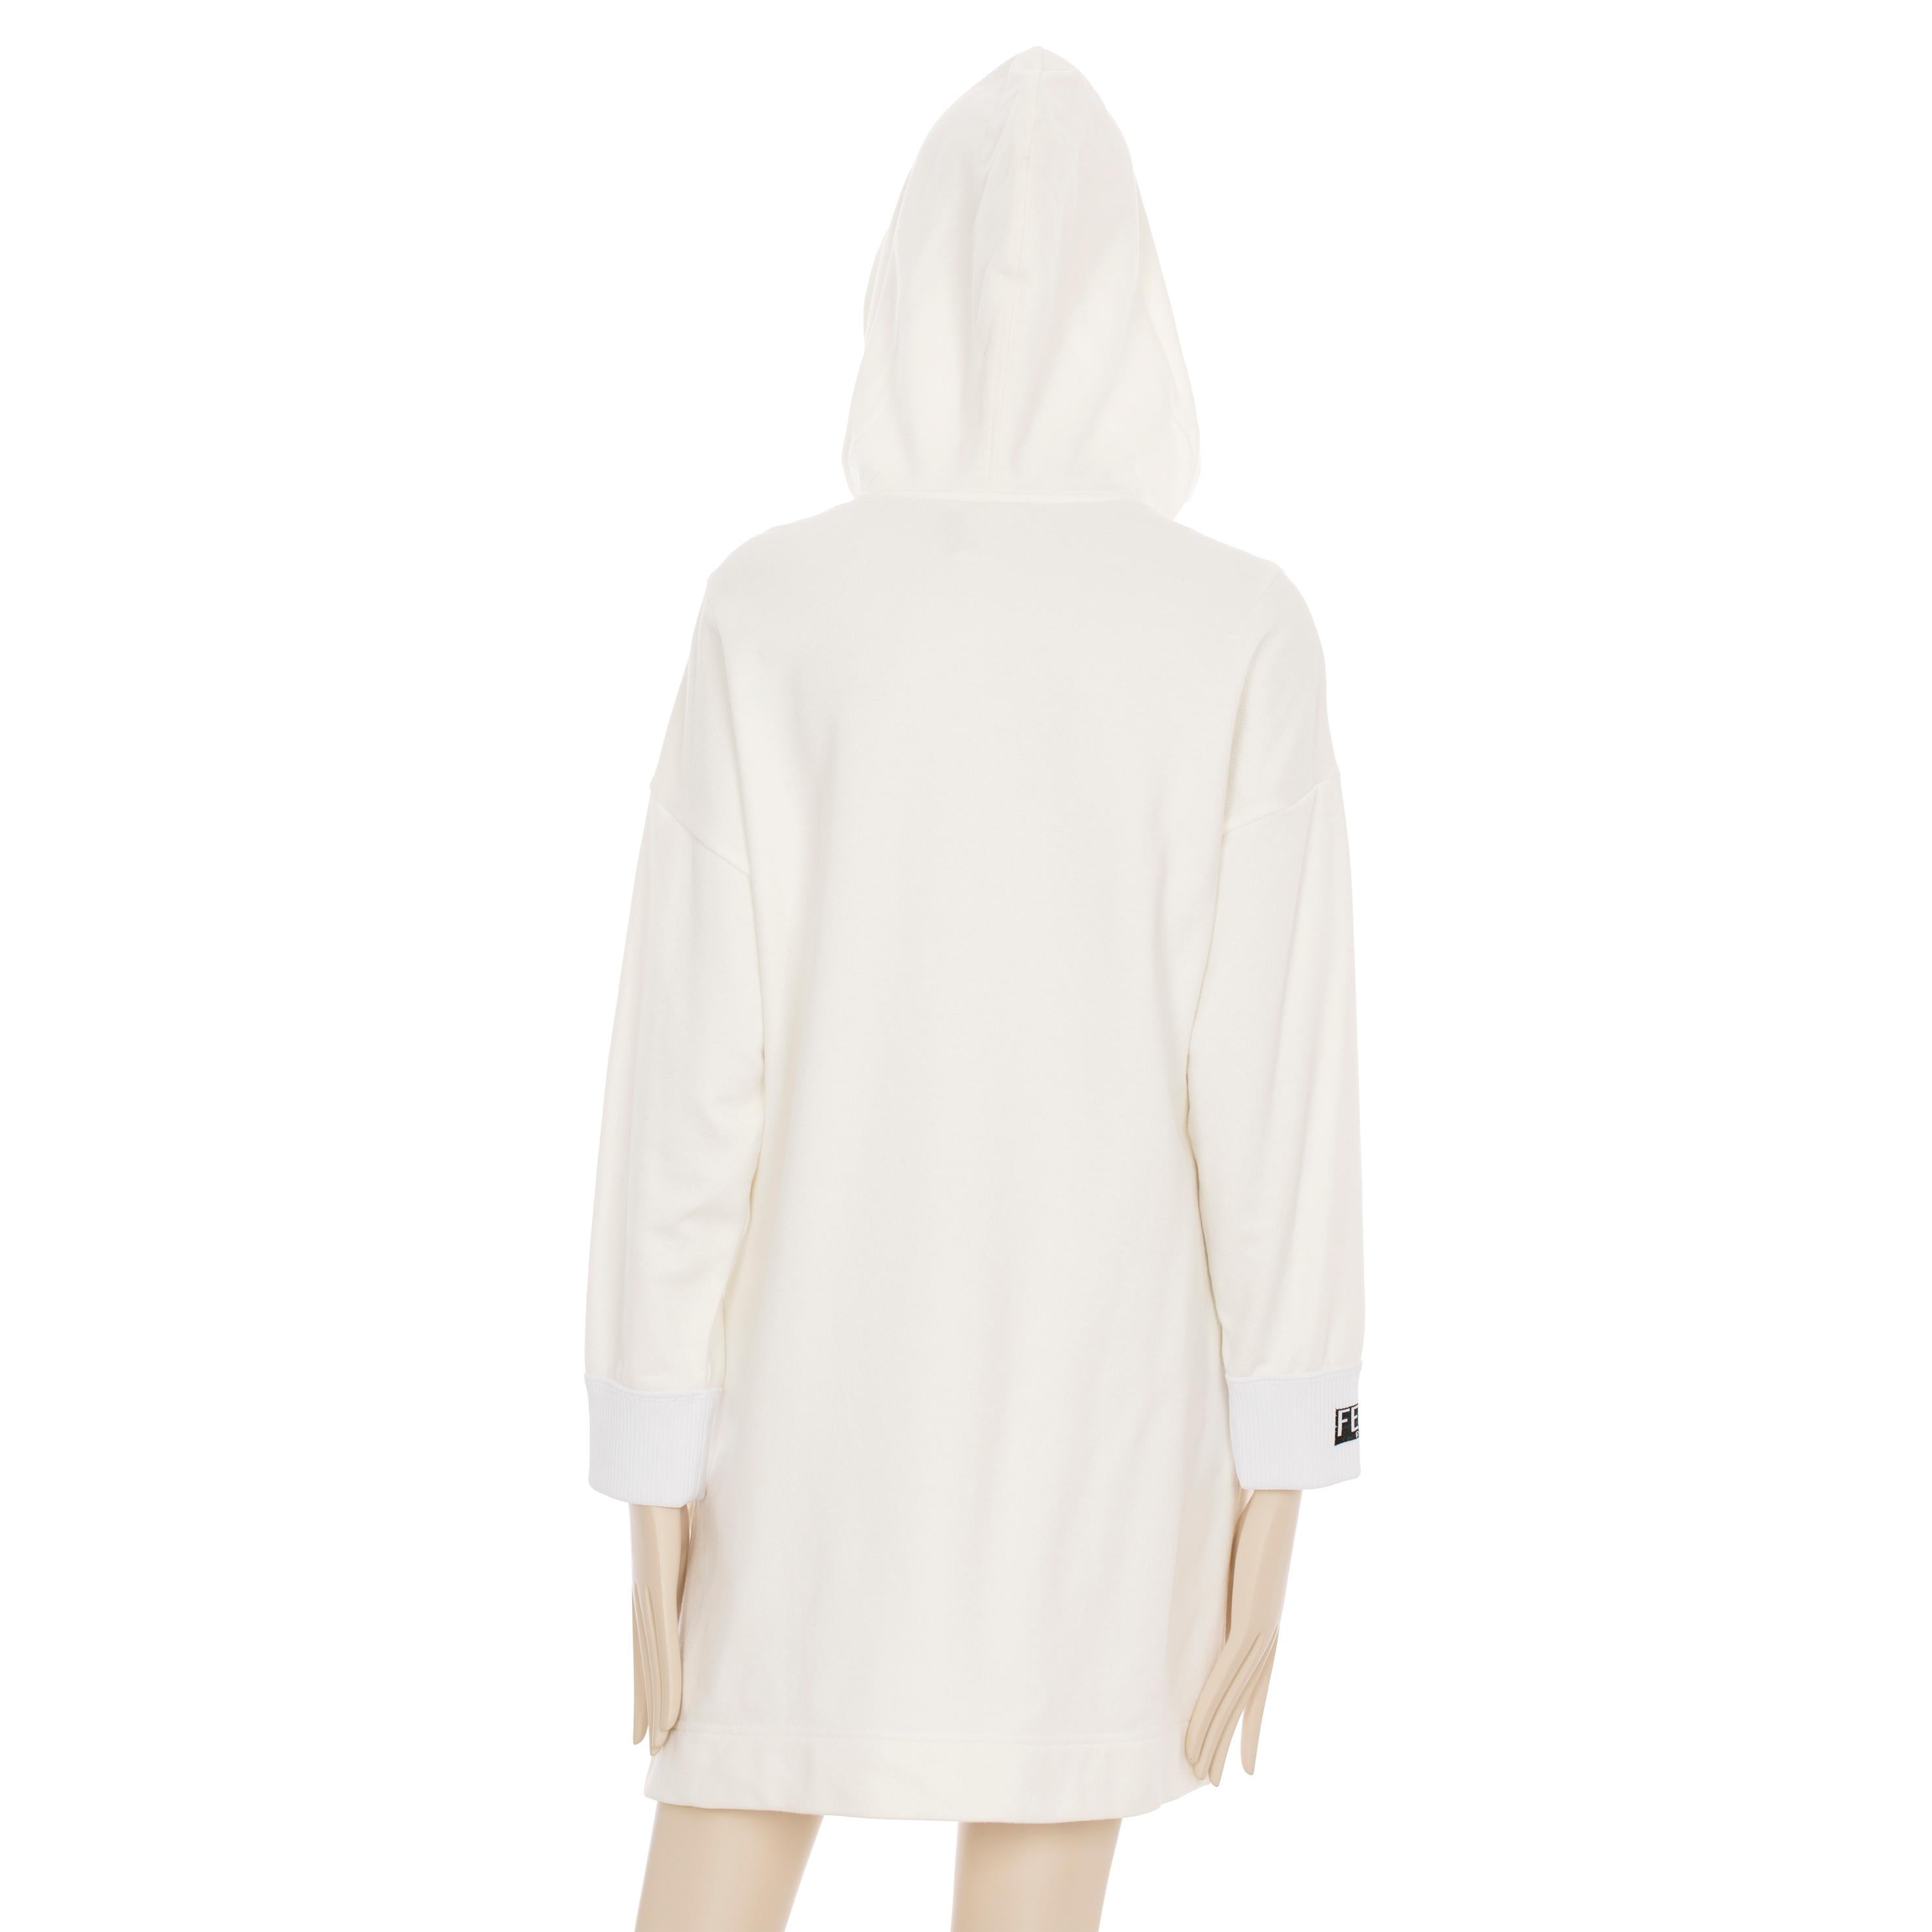 Fendi Oversized Hooded Sweater With Logo Details 38 IT For Sale 1